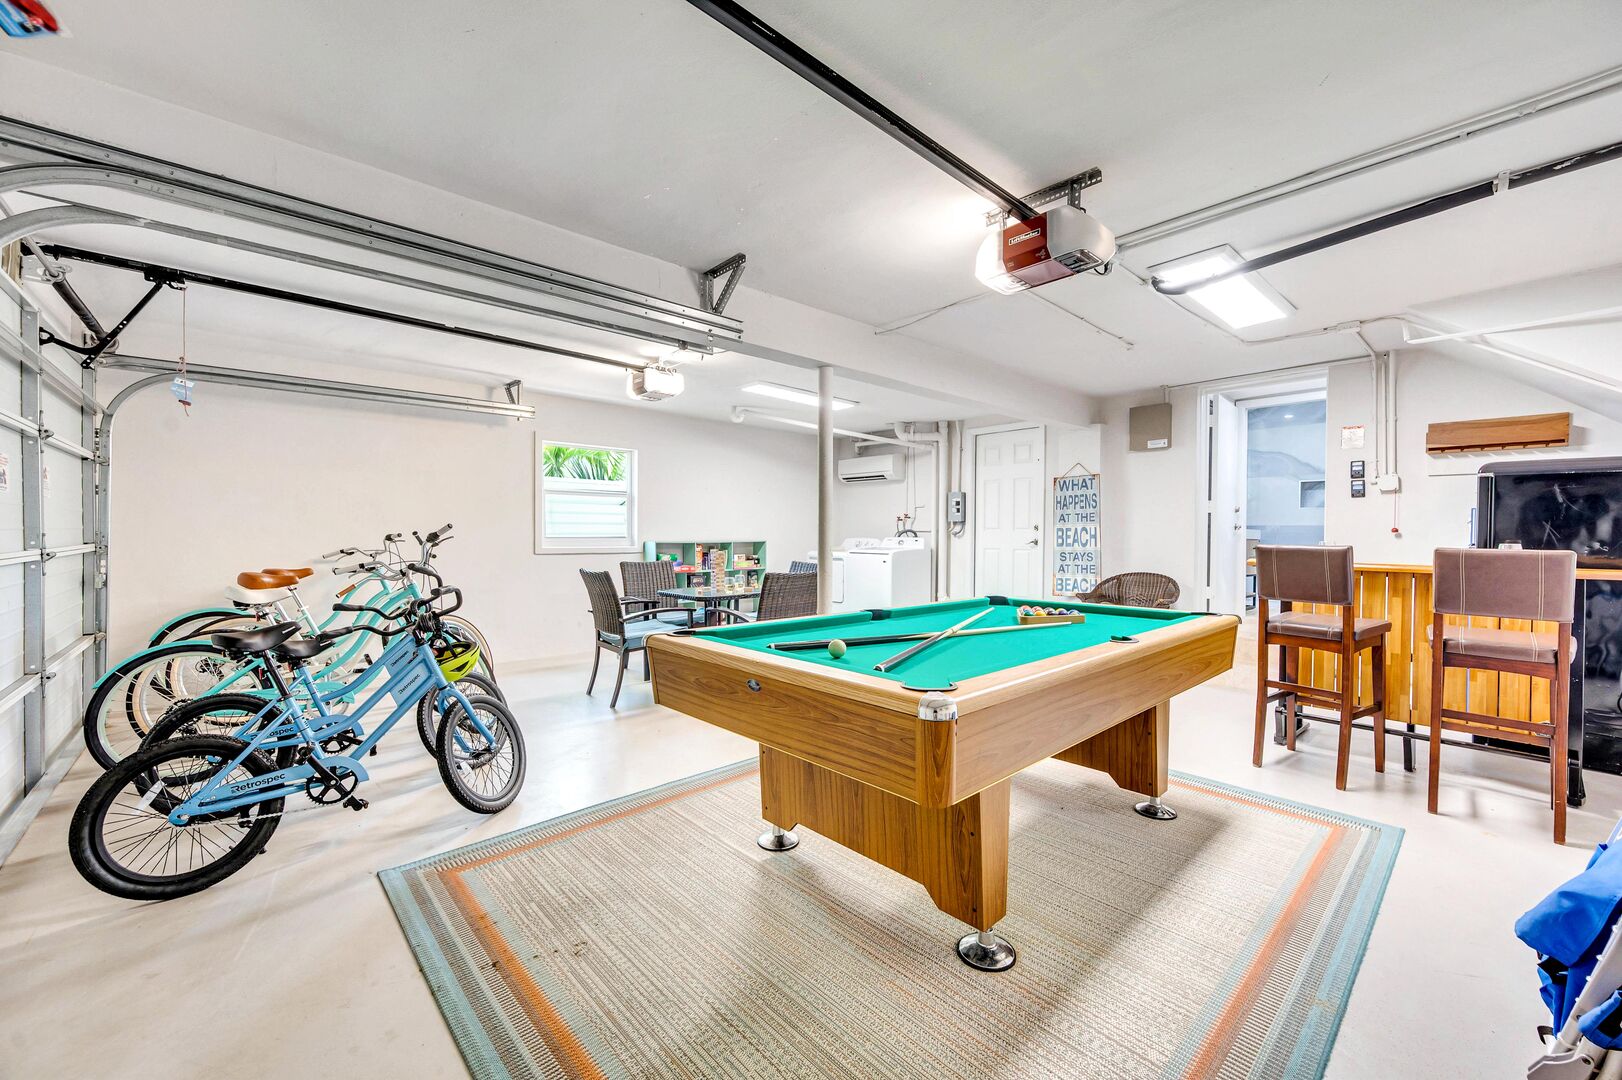 Enjoy a fun game of pool, bean bag toss or board games in the game room.